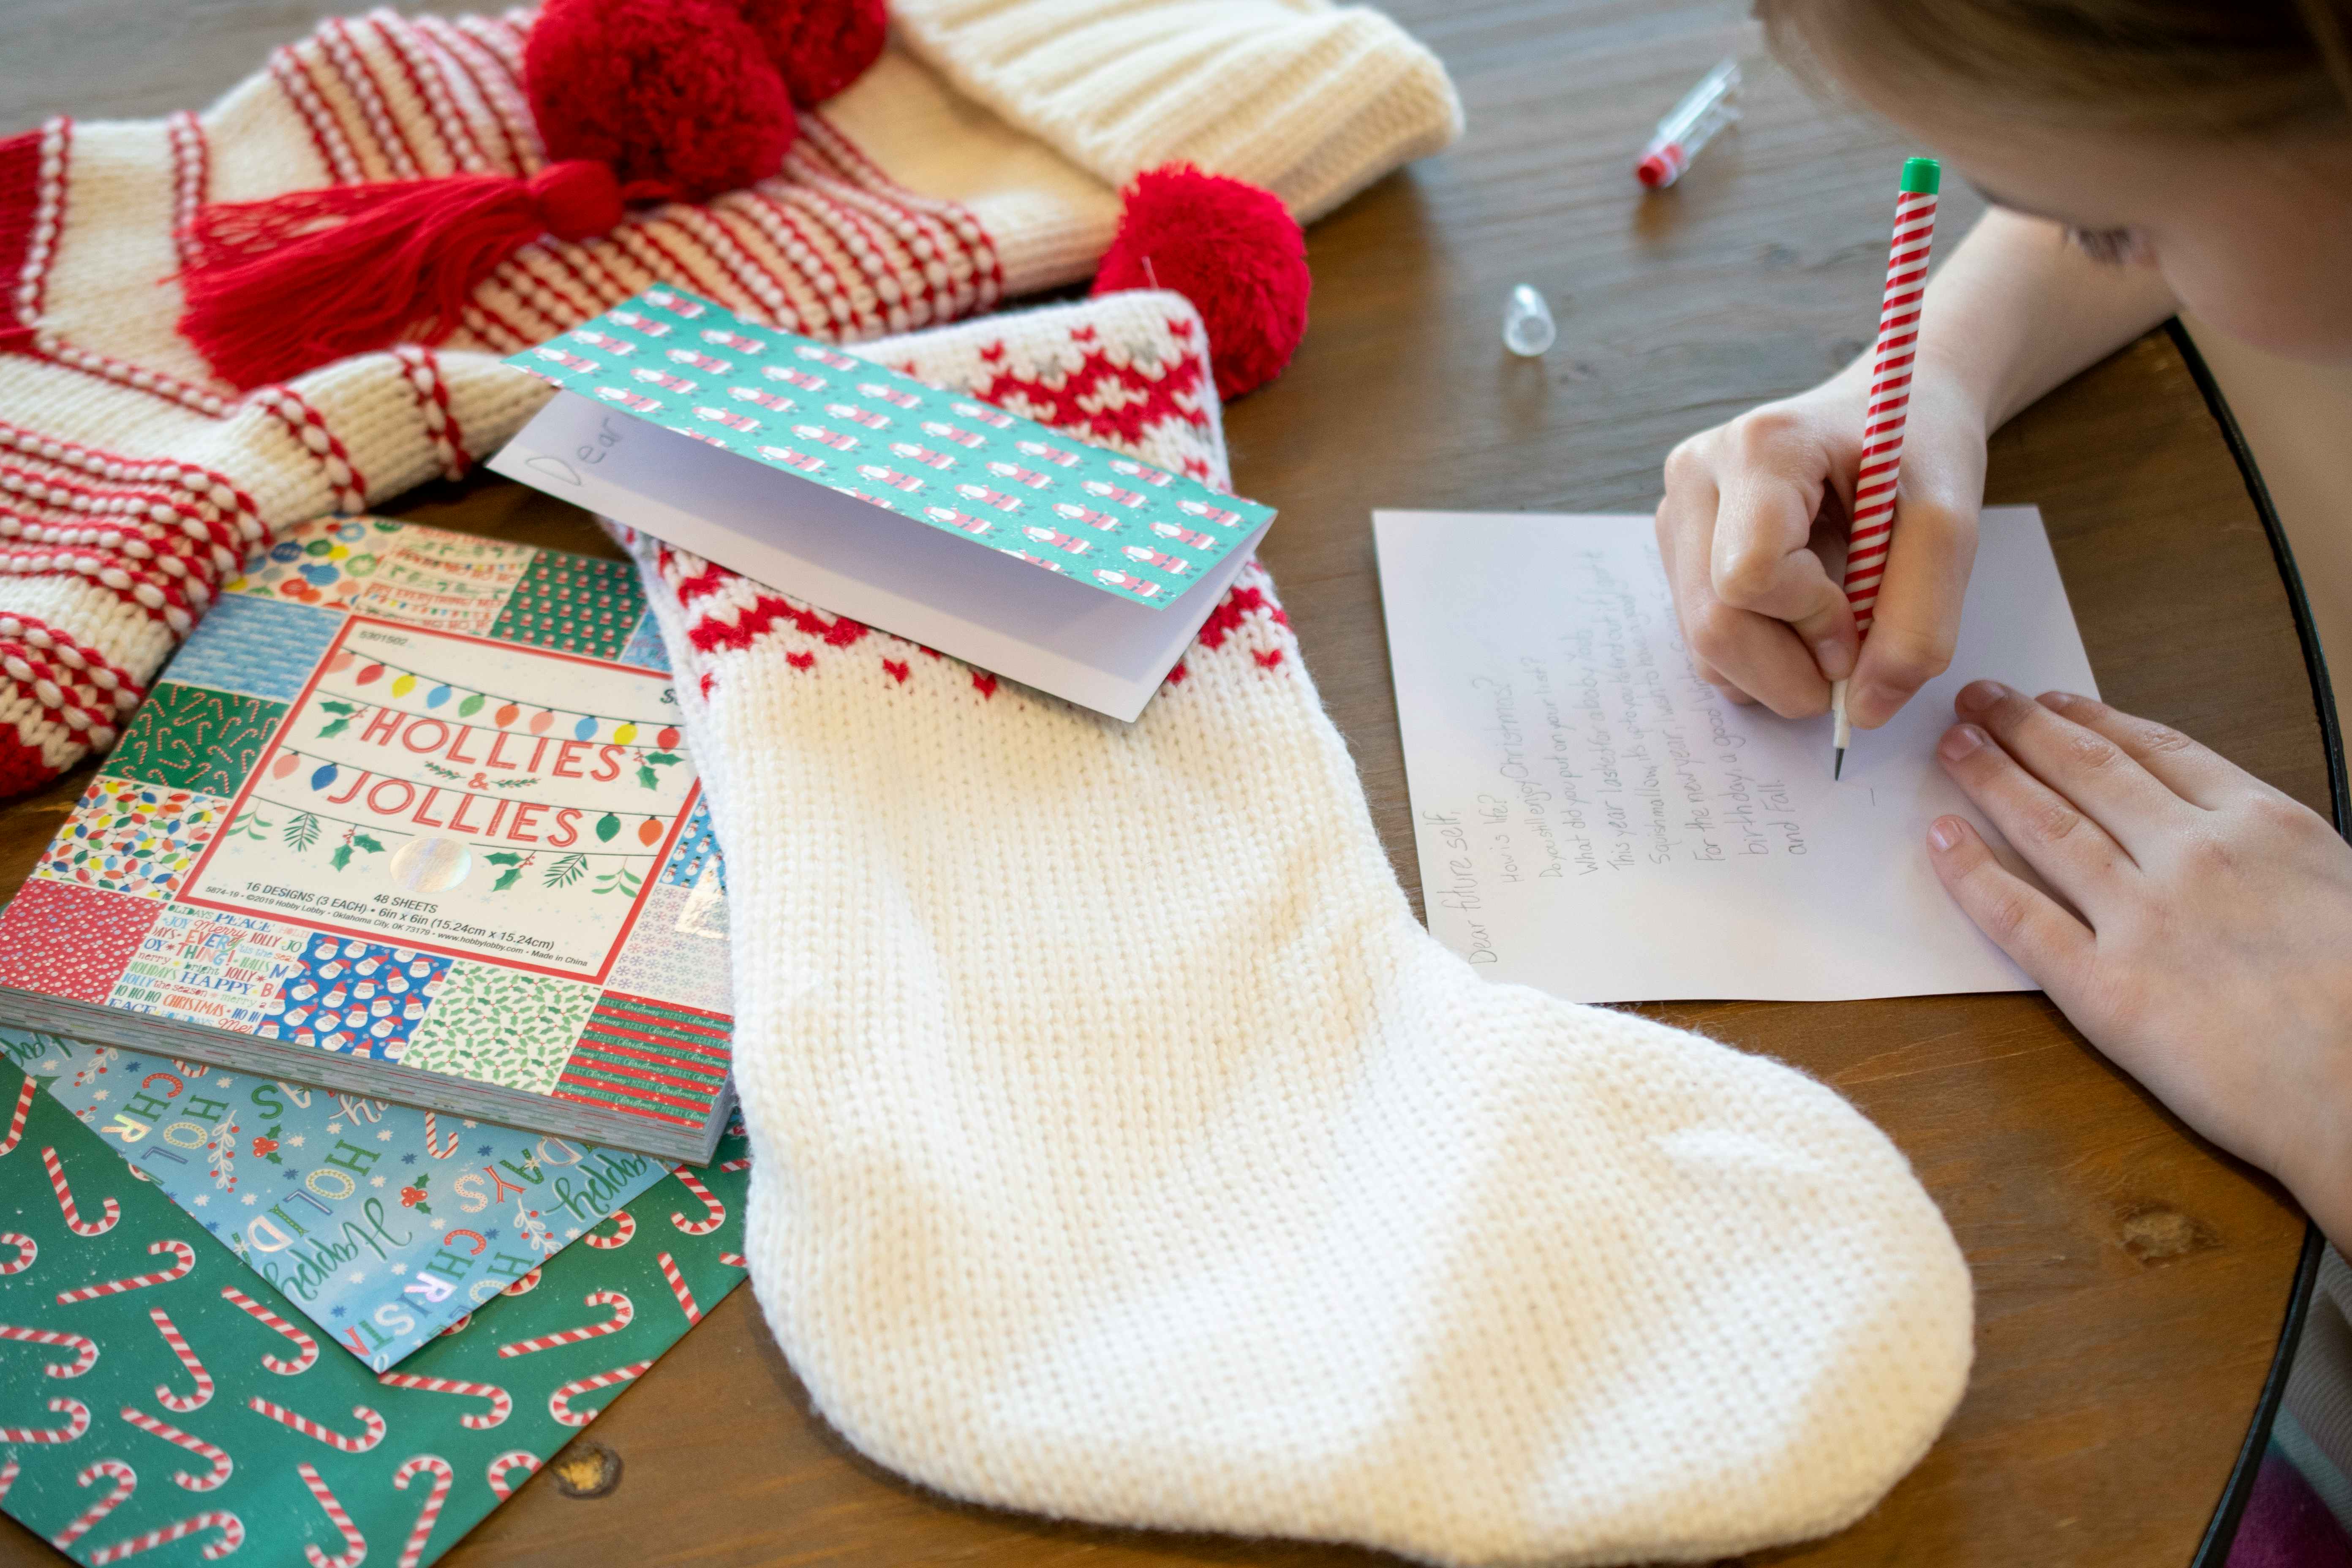 Kids writing notes on Christmas card stock and putting them in their stockings.